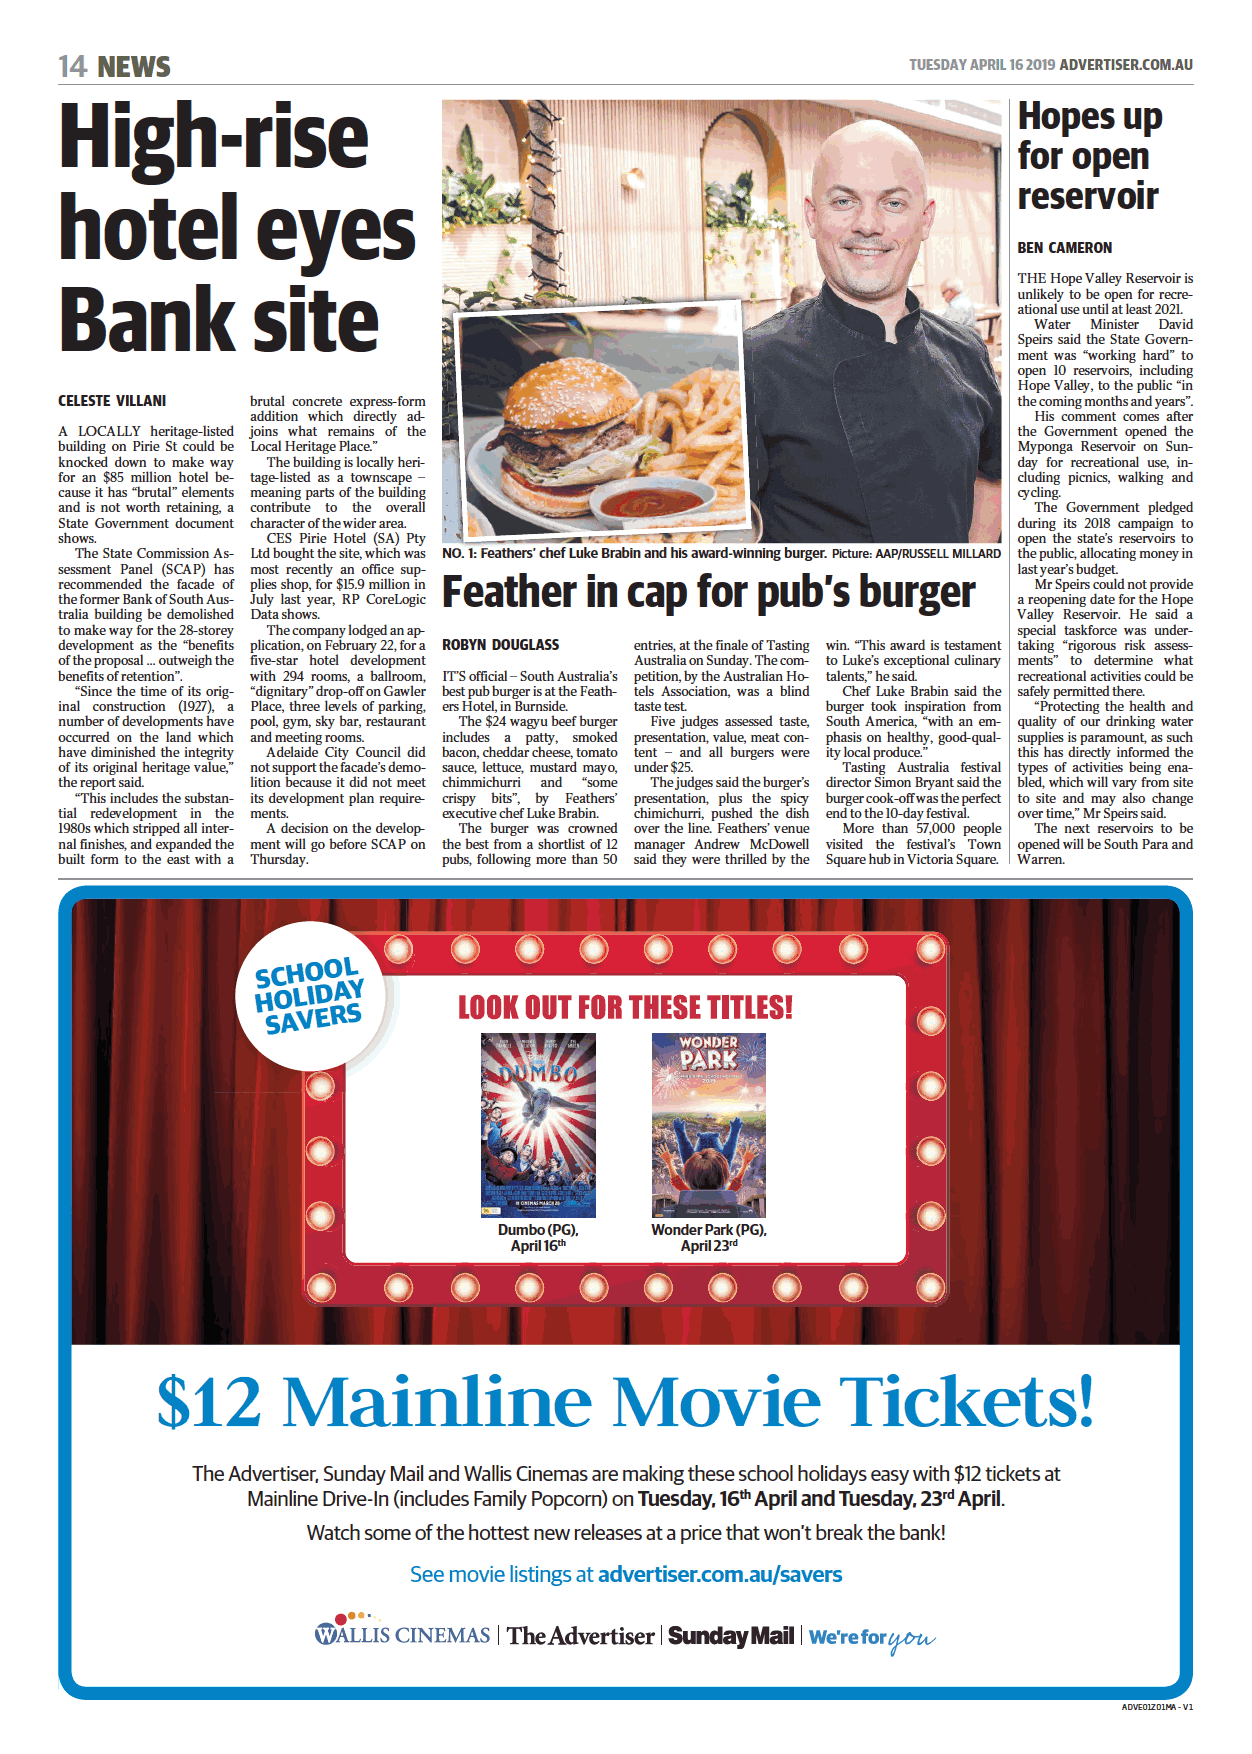 Feathers Hotel Precinct - The Advertiser 1 (Print).png